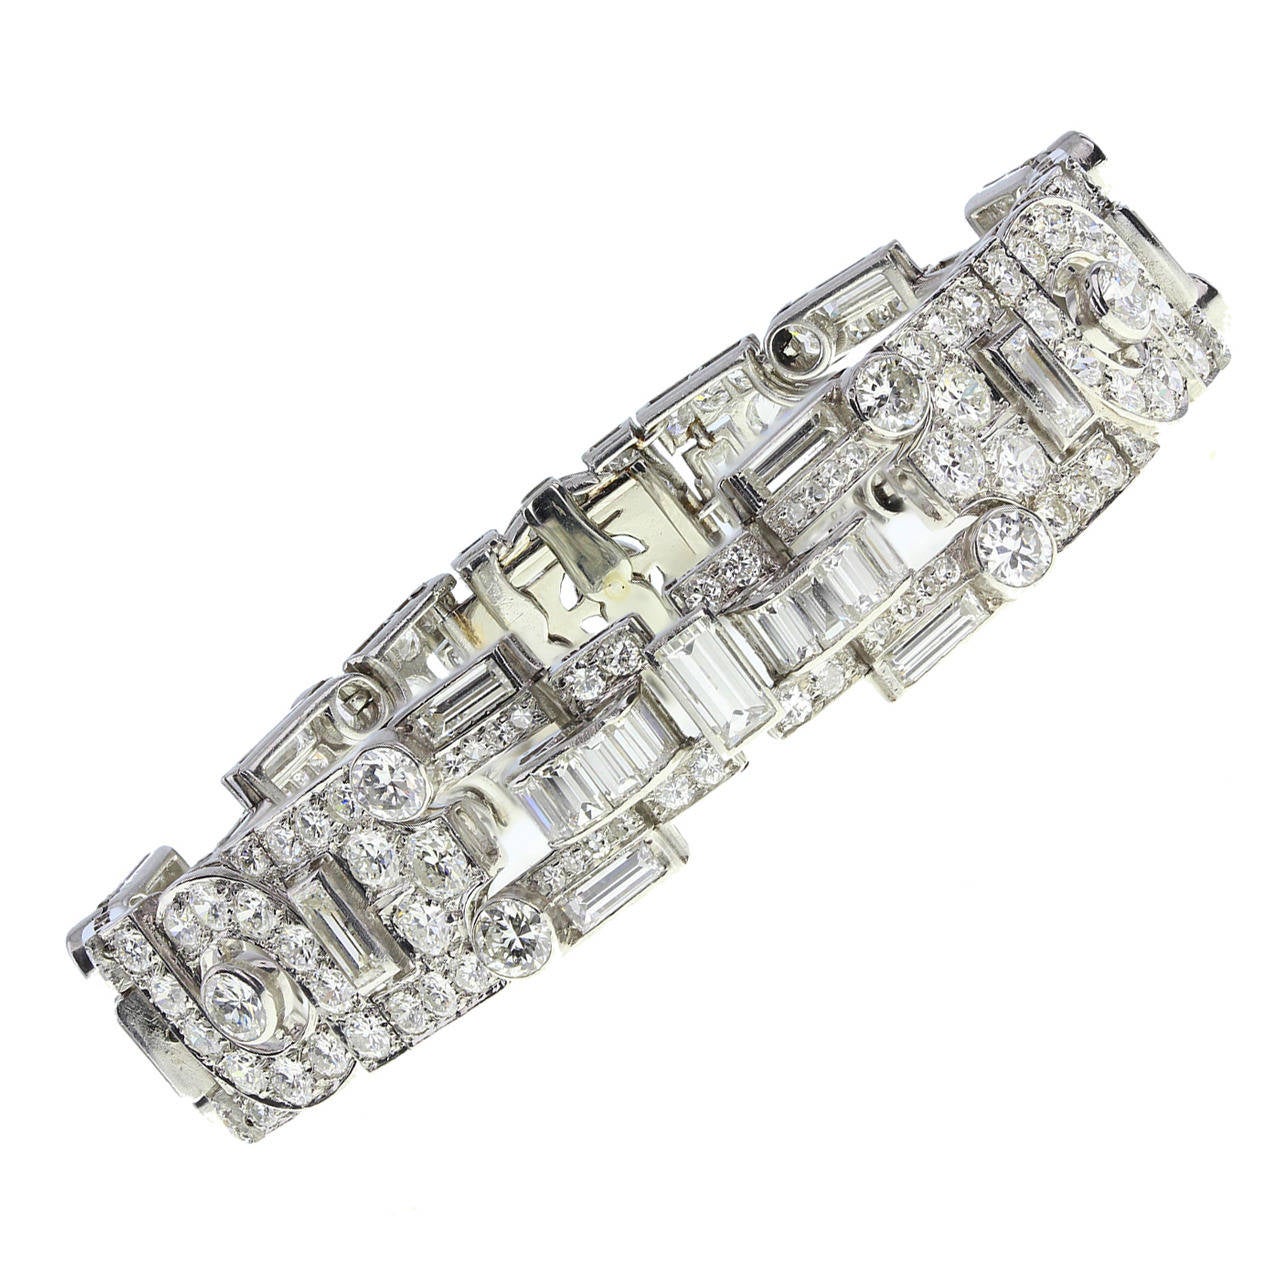 Rampant Art Deco bracelet featuring the typical geometric patterned panels of the era. Set with brilliant-cut and baguette-cut diamonds. Tongue fastening with safety clasp. Approximately 20.00 carats of diamond in total, G-H colour, VS clarity. In